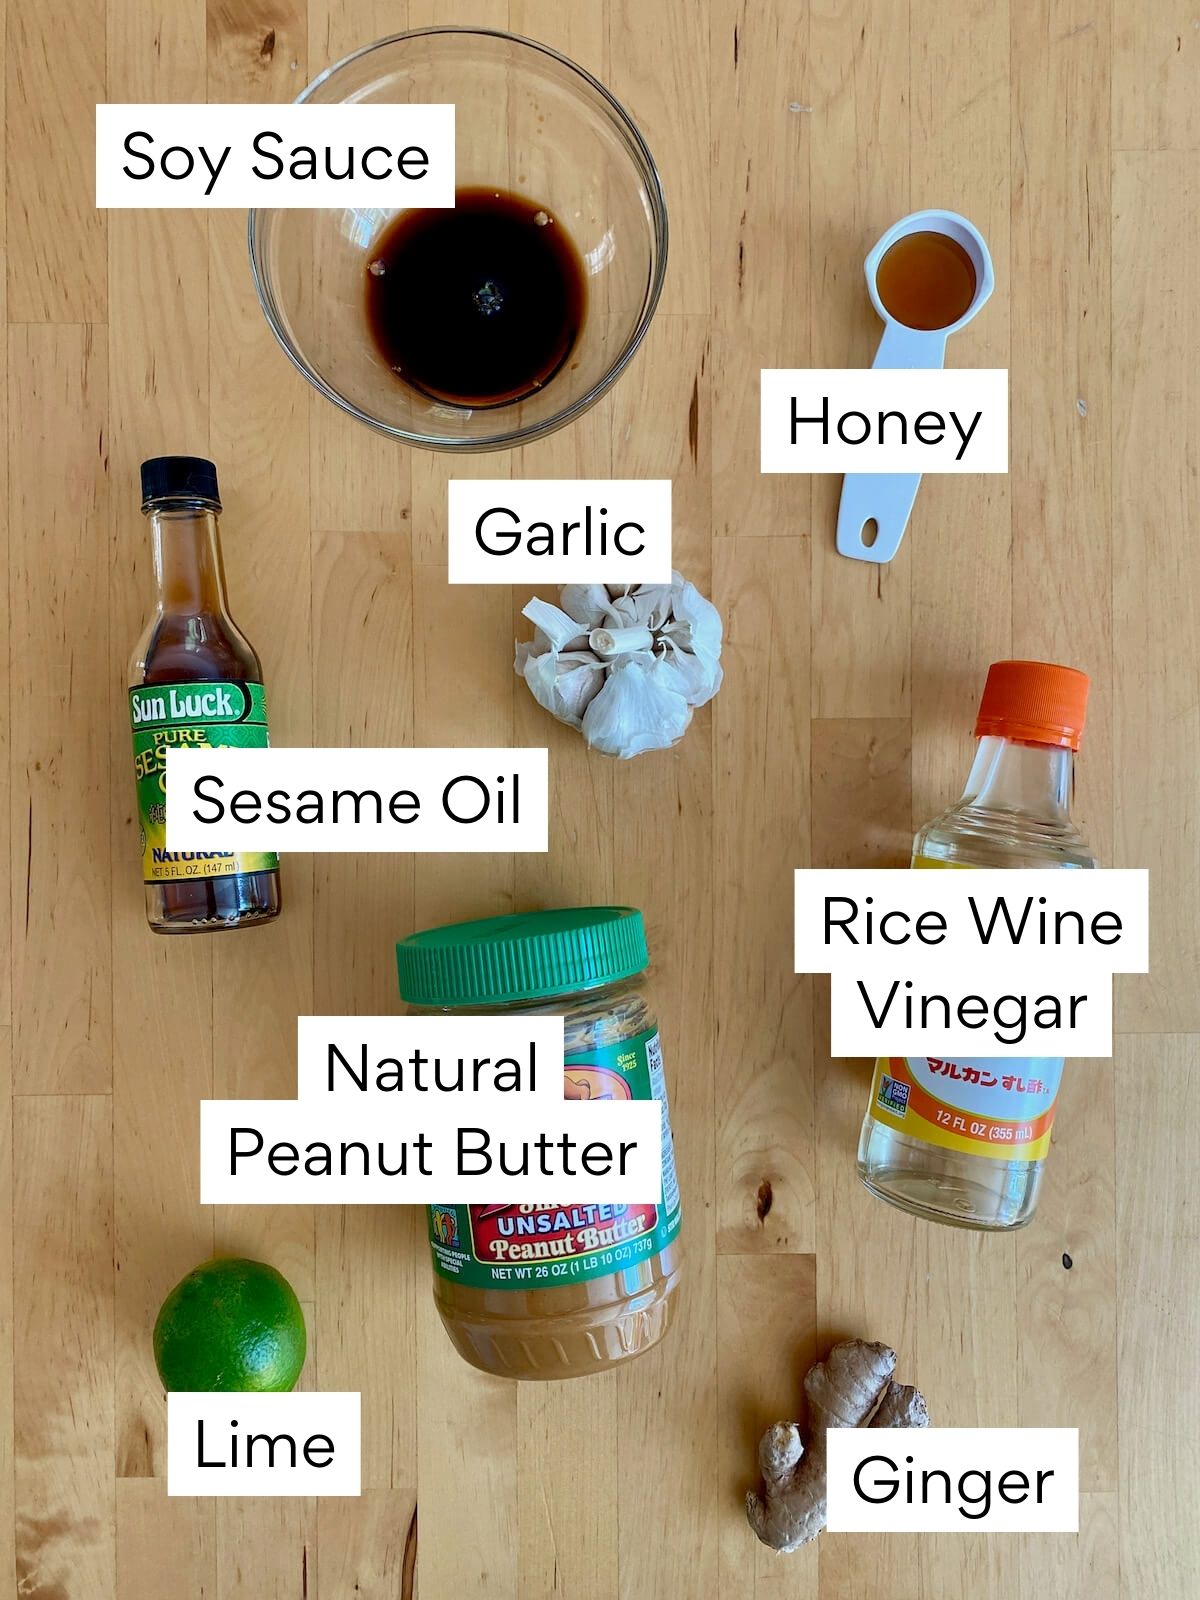 The ingredients to make peanut salad dressing. Each ingredient is labeled with text.